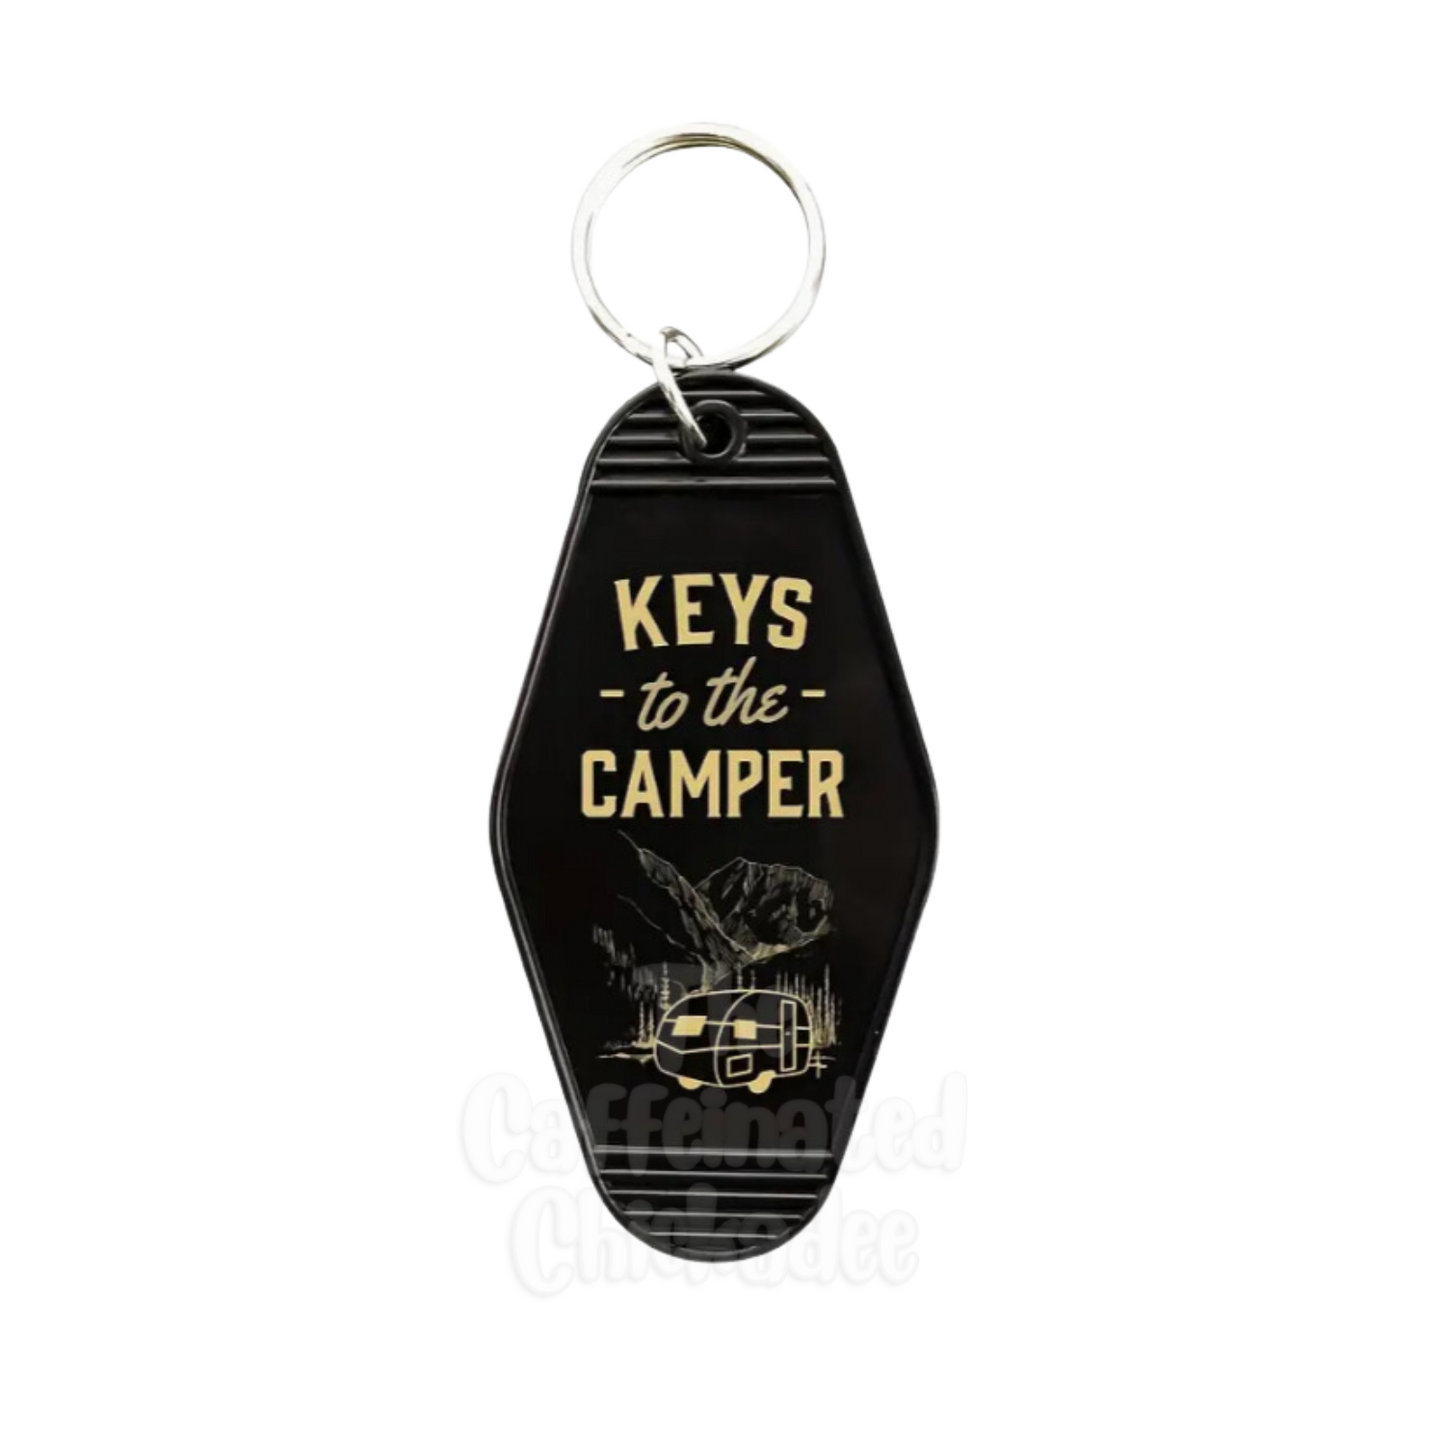 Keys To The Camper - Keychain